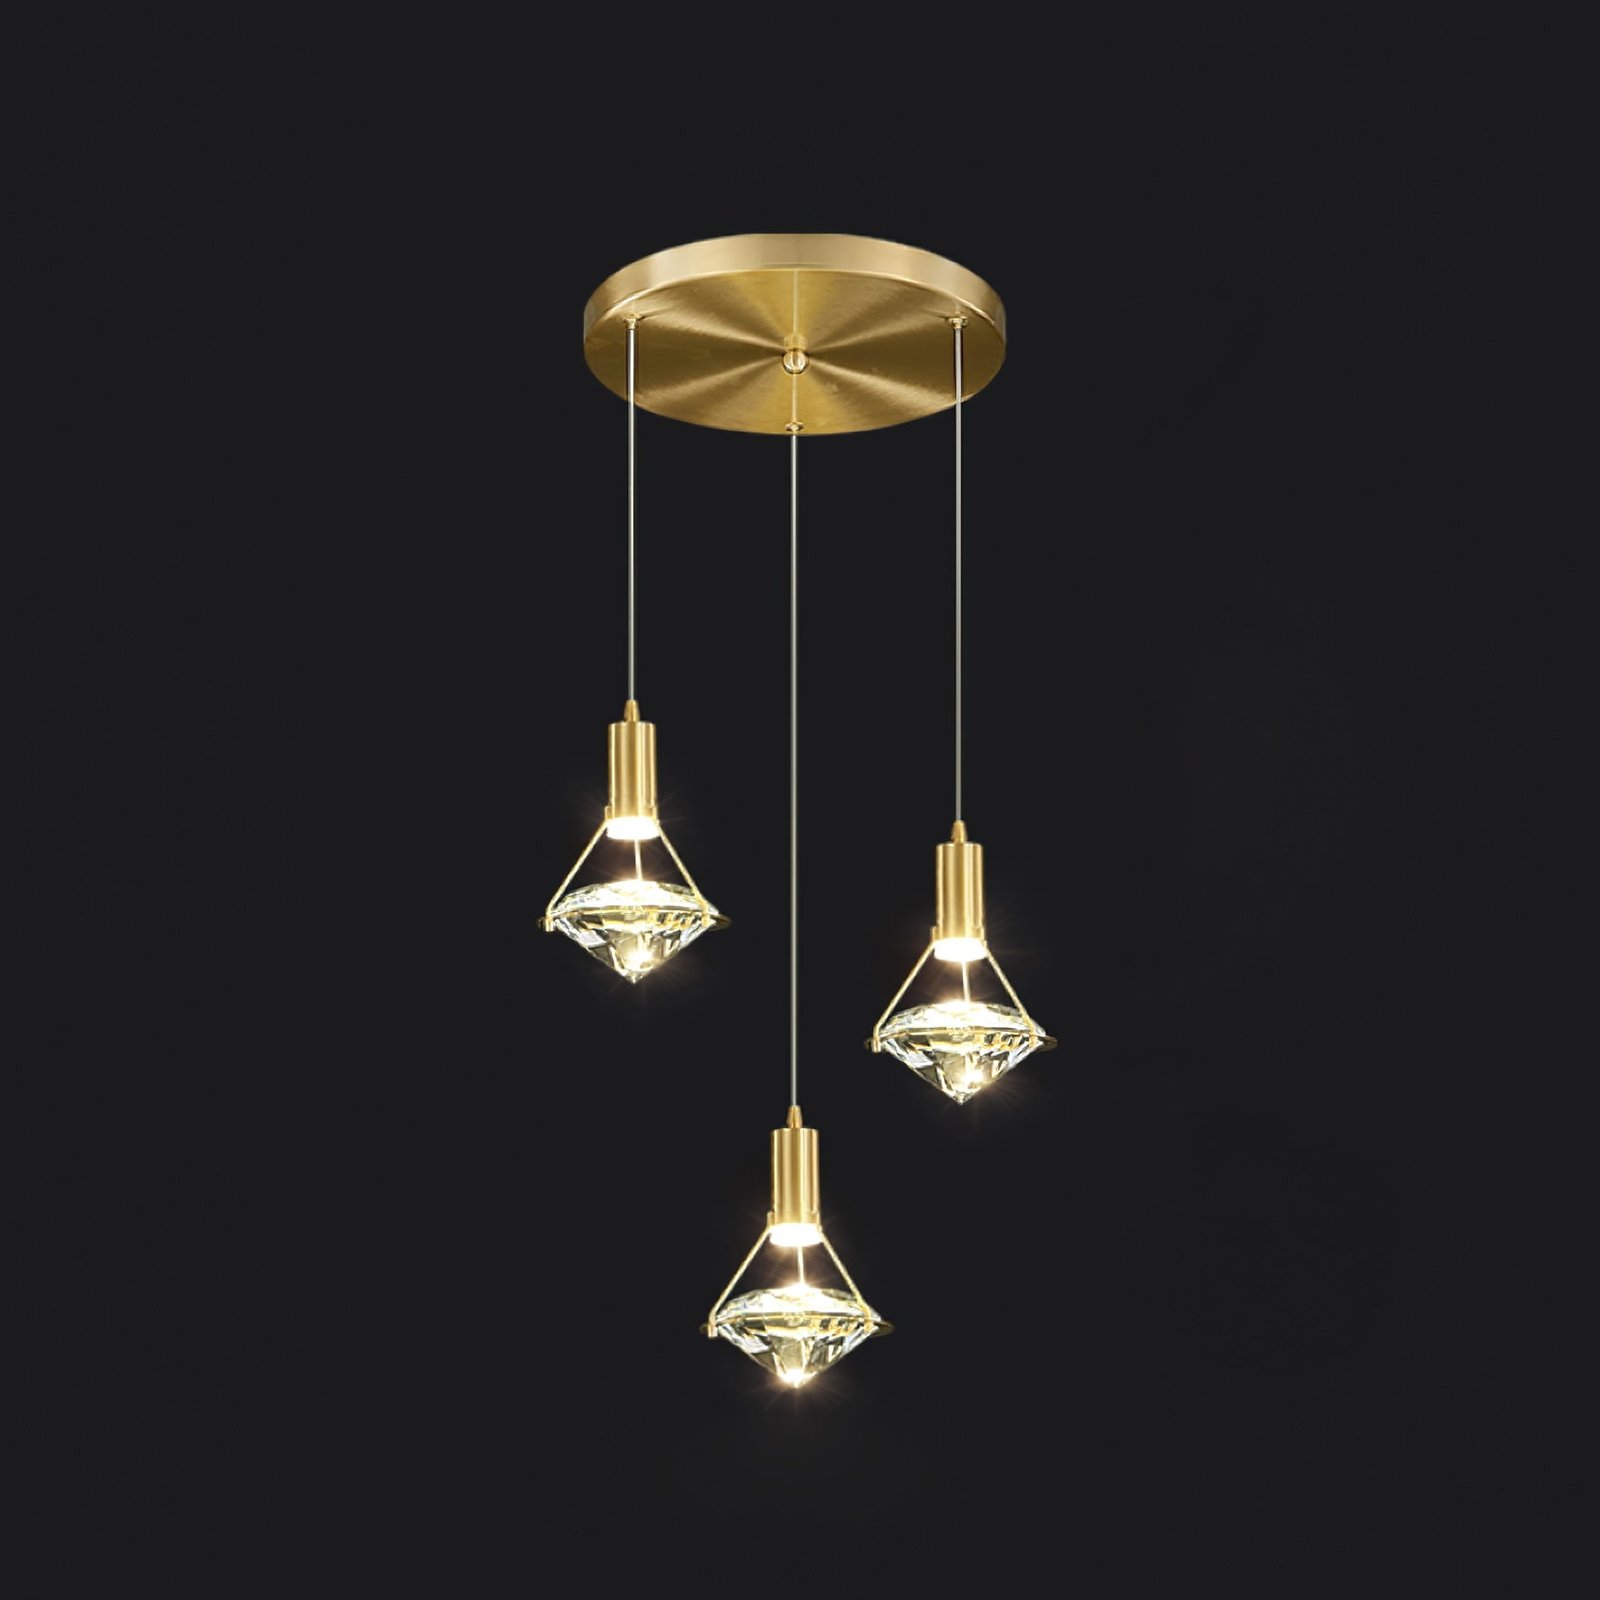 Exquisite Three-Headed Diamond Pendant Lamp: 11.8″ Diameter x 39.3″ Height (30cm x 100cm), Elegant Brass and Clear Finish, and Multicolor Changing Light